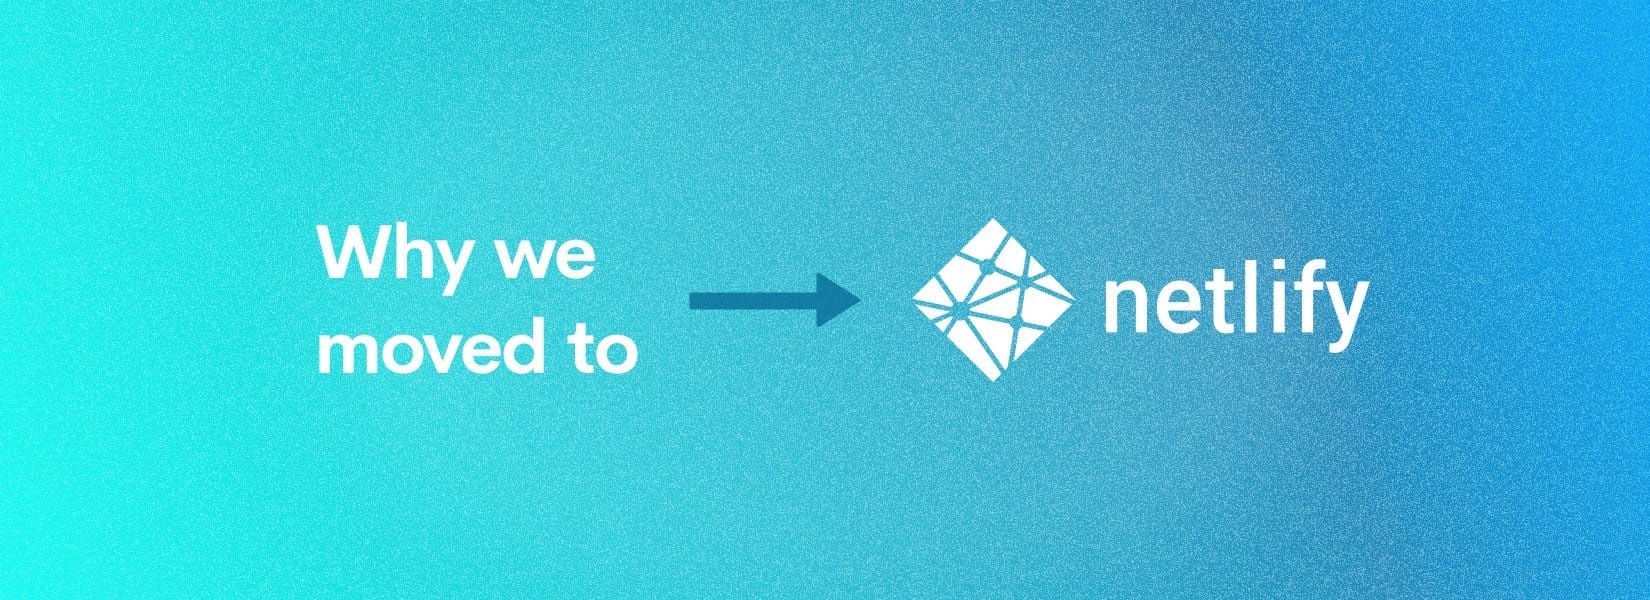 Top 7 reasons why we moved from CircleCI to Netlify